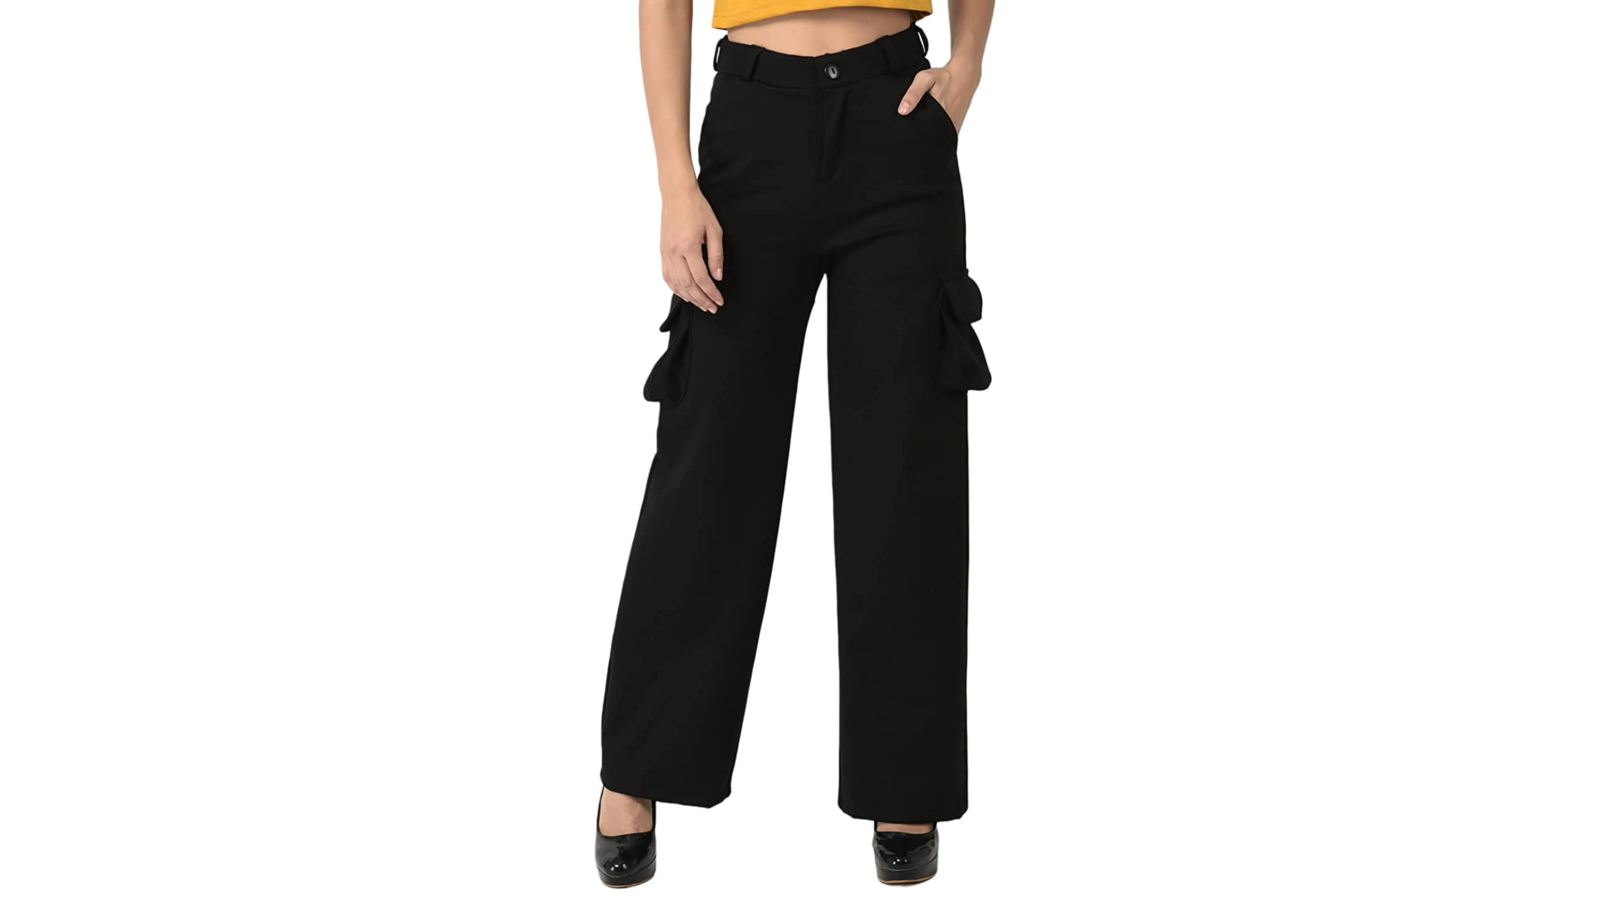 Deal of The Day Clearance Cargo Pants Women Straight Wide Leg